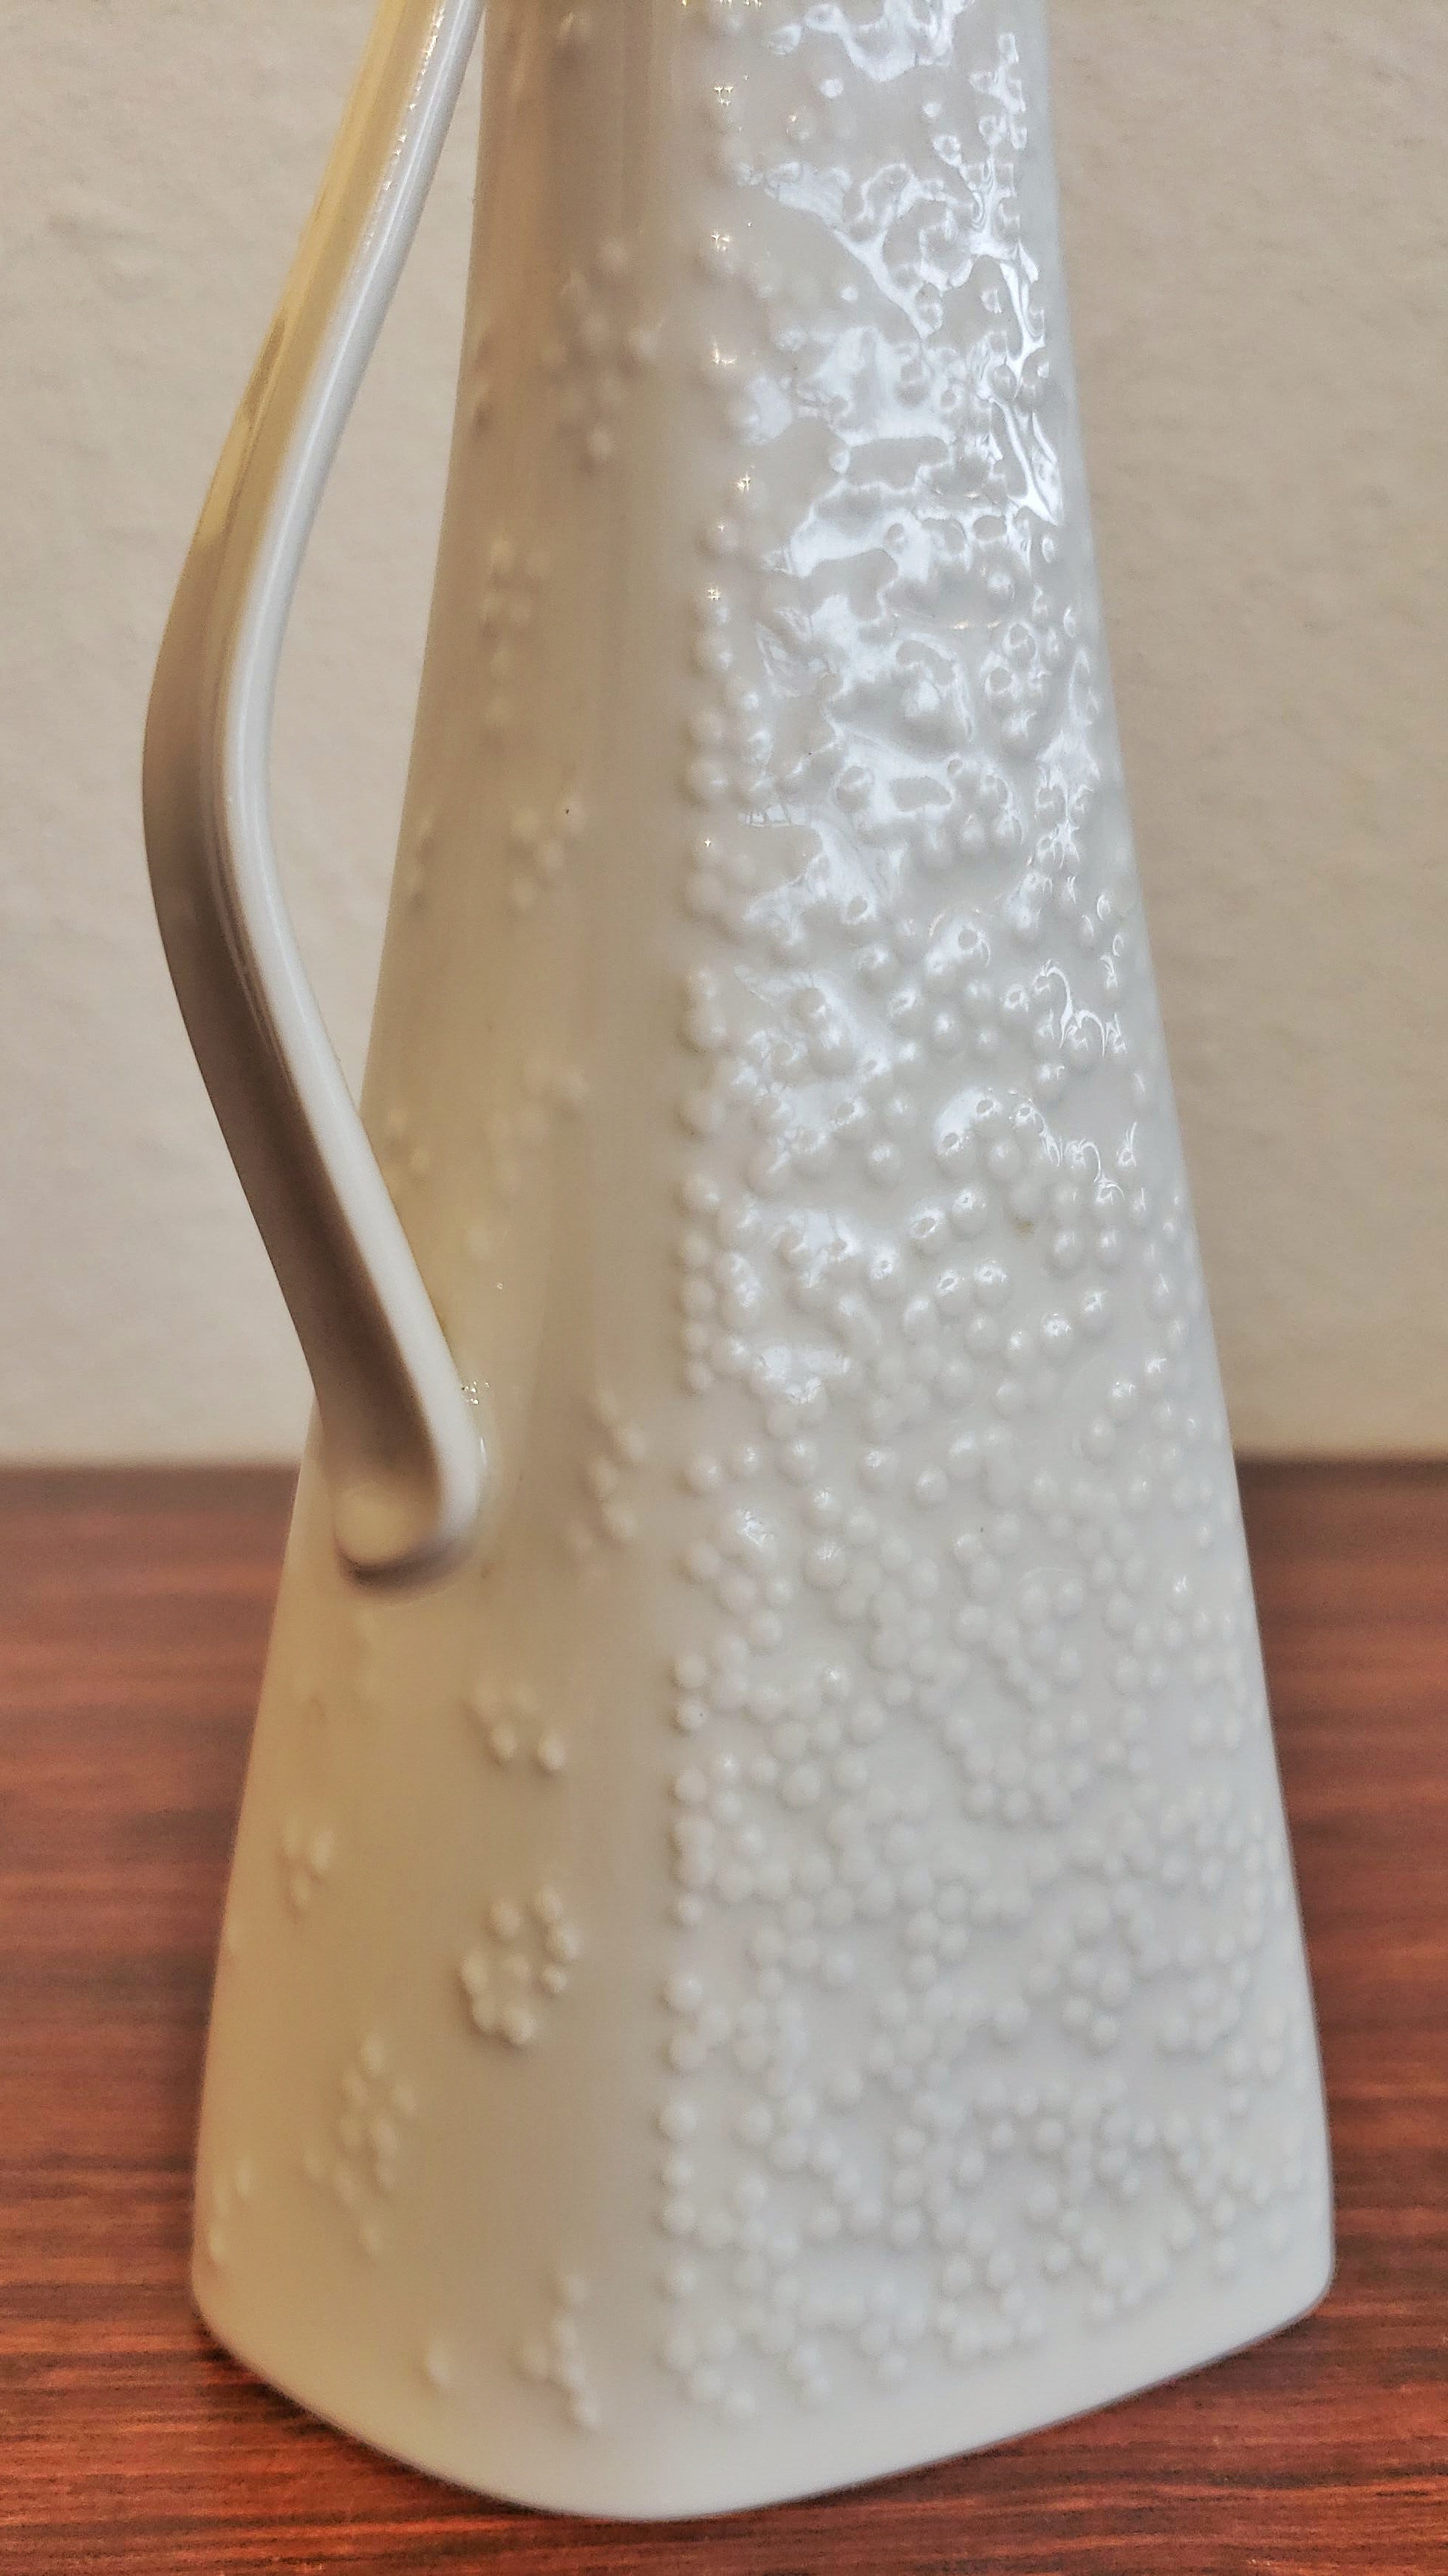 HANS ACHTZIGER FOR HUTSCHENREUTHER BUD VASE WITH HANDLE